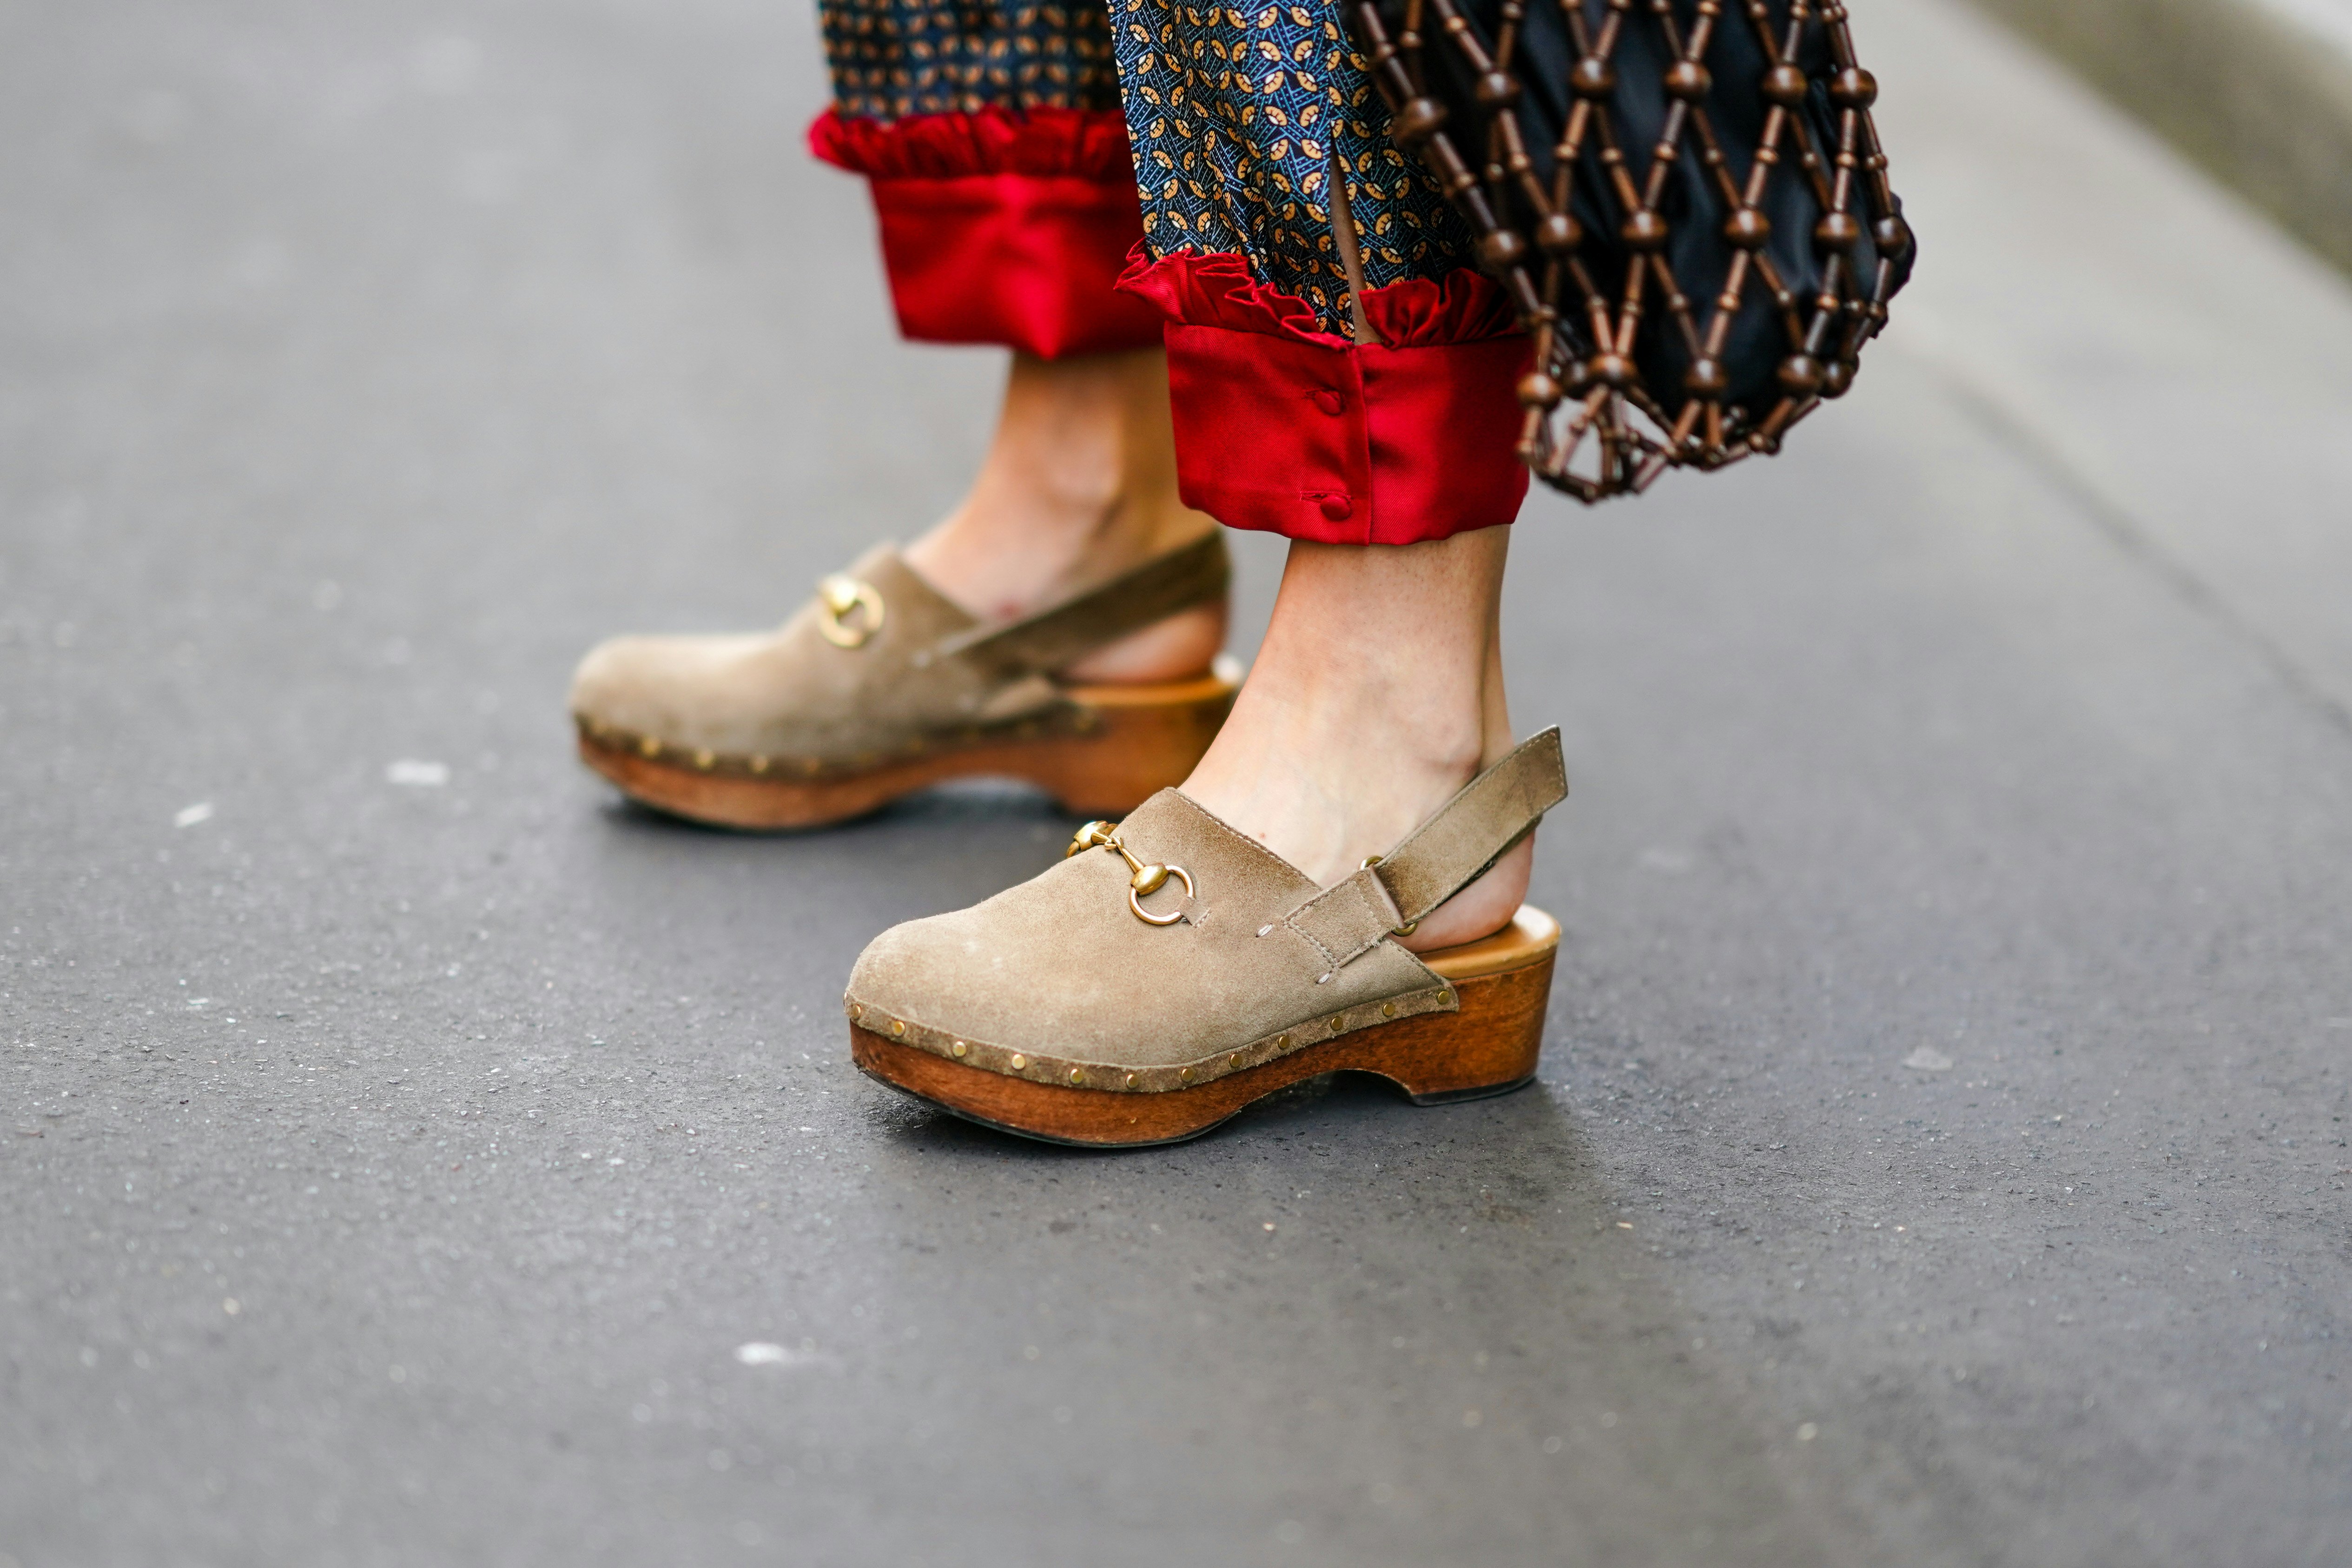 fashion clogs and mules